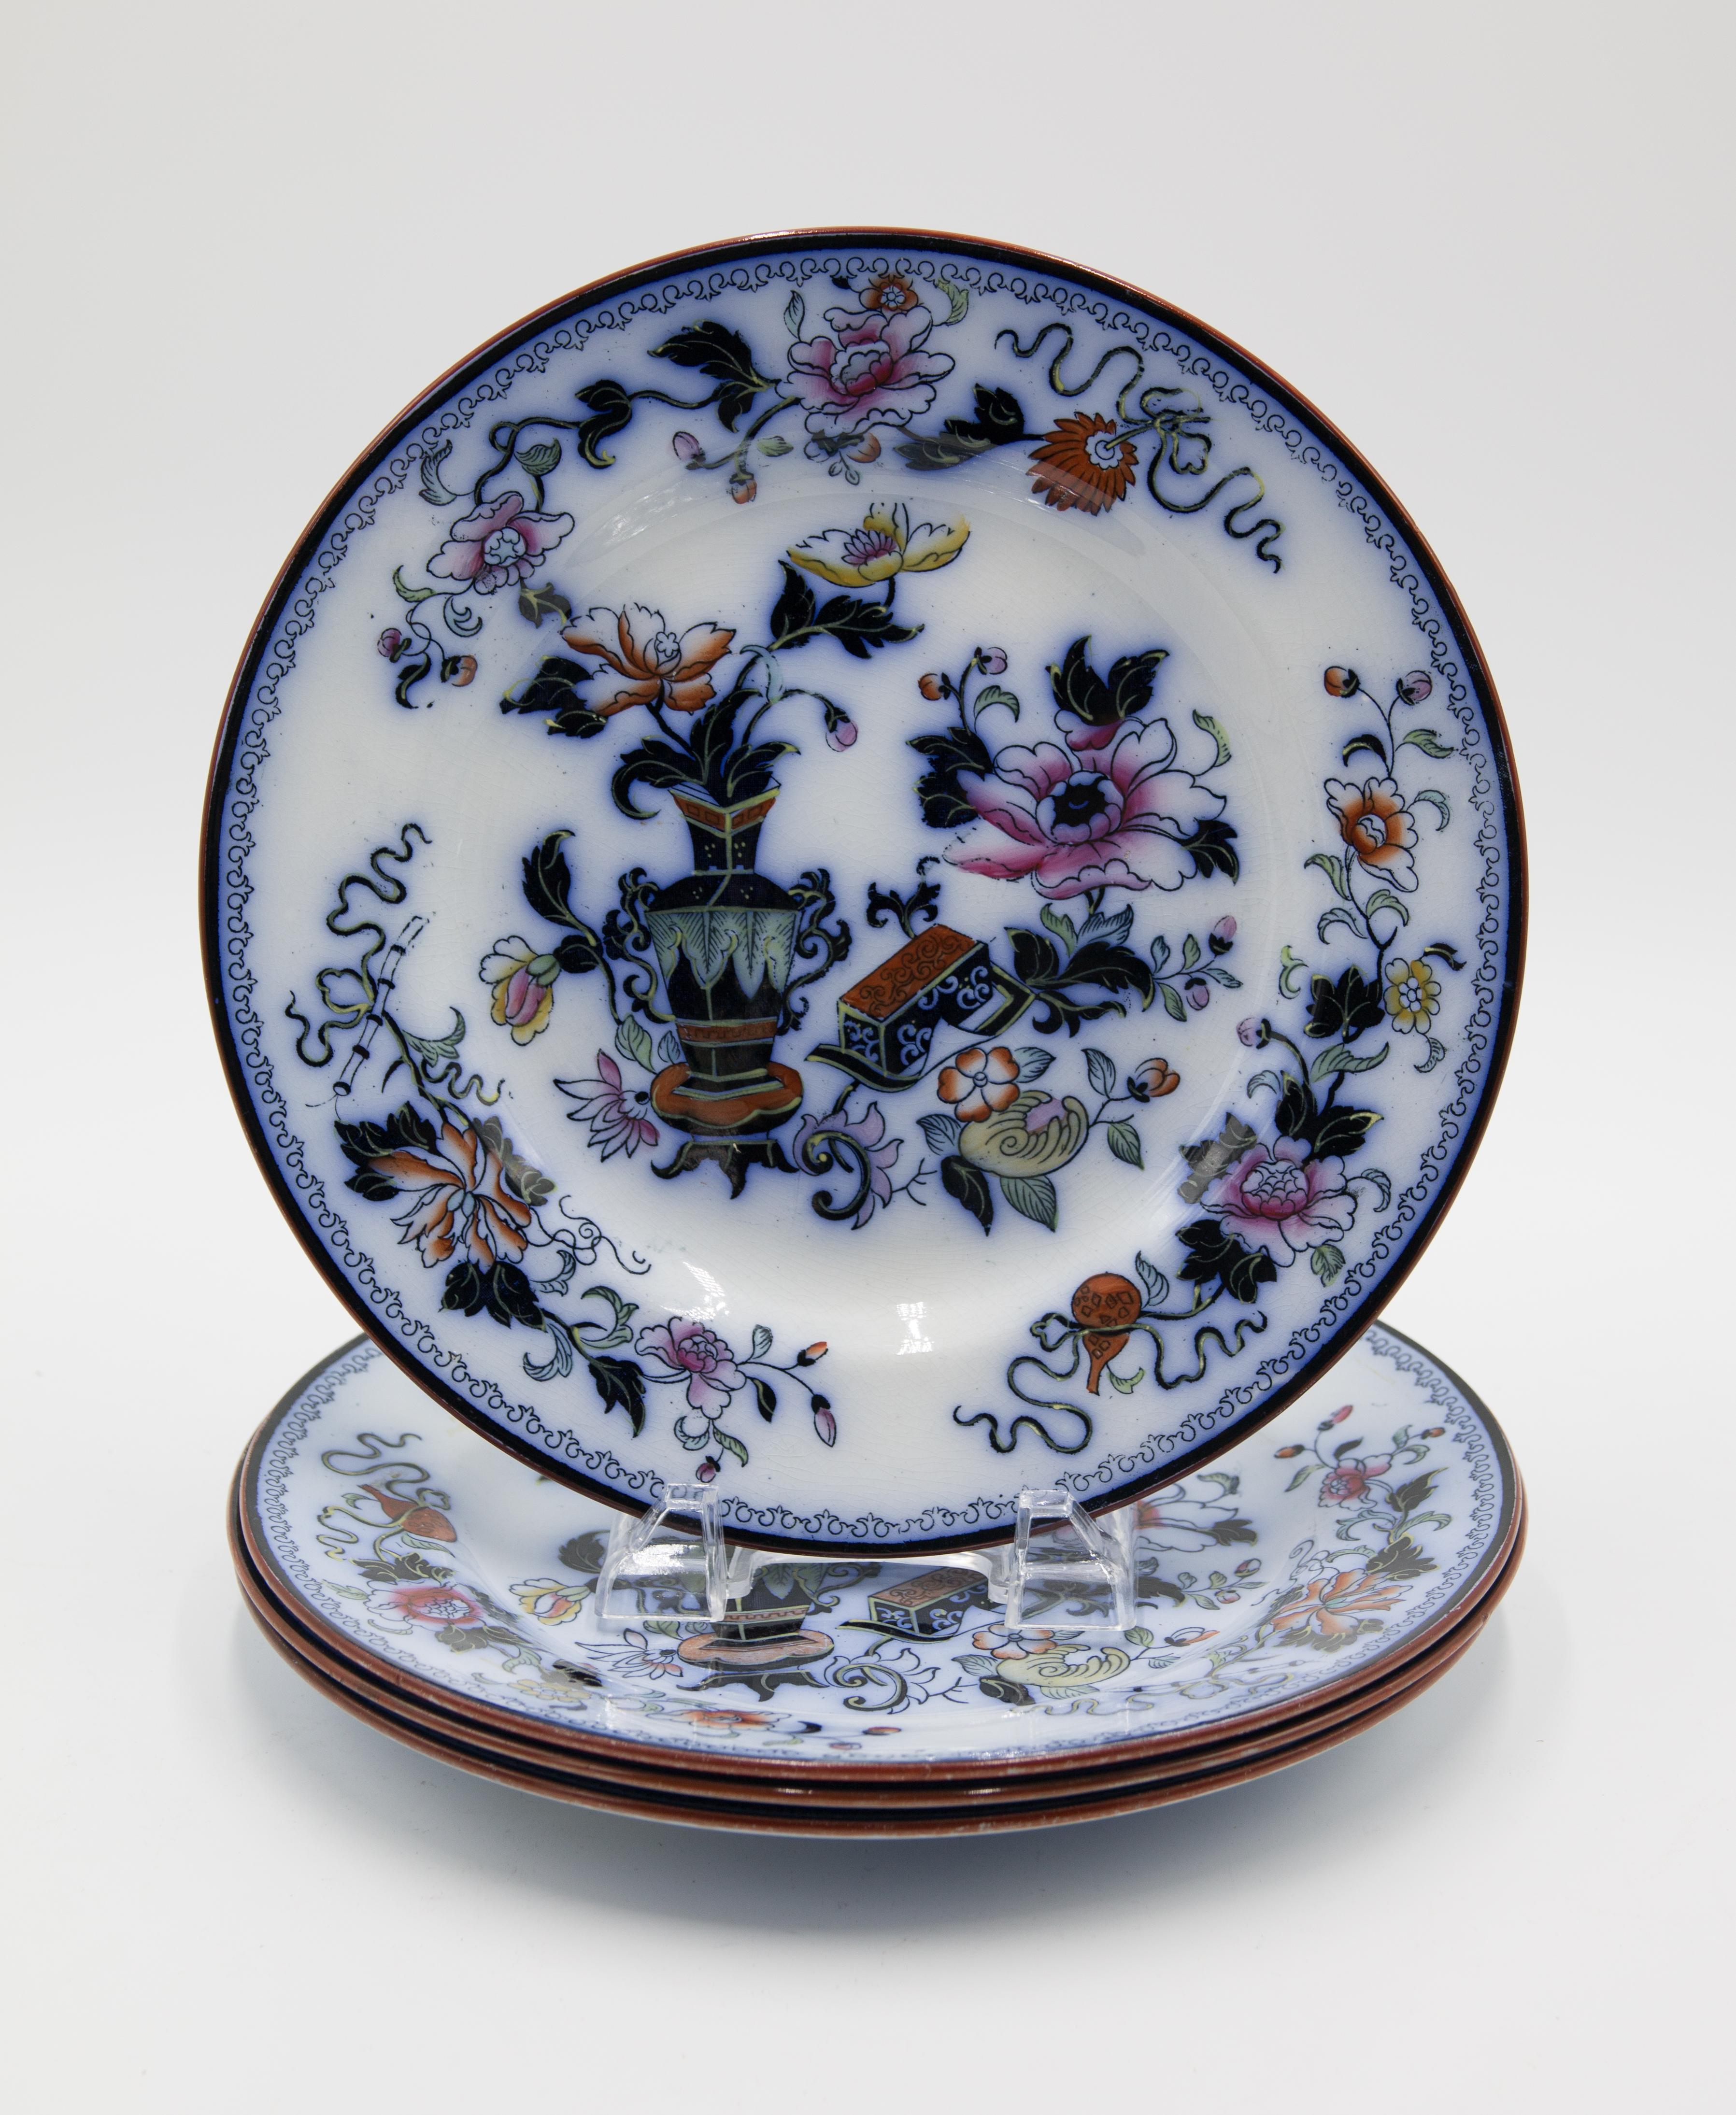 Porcelain English Staffordshire Ridgway Chinoiserie Japanica Pattern Plate, circa 1870 For Sale